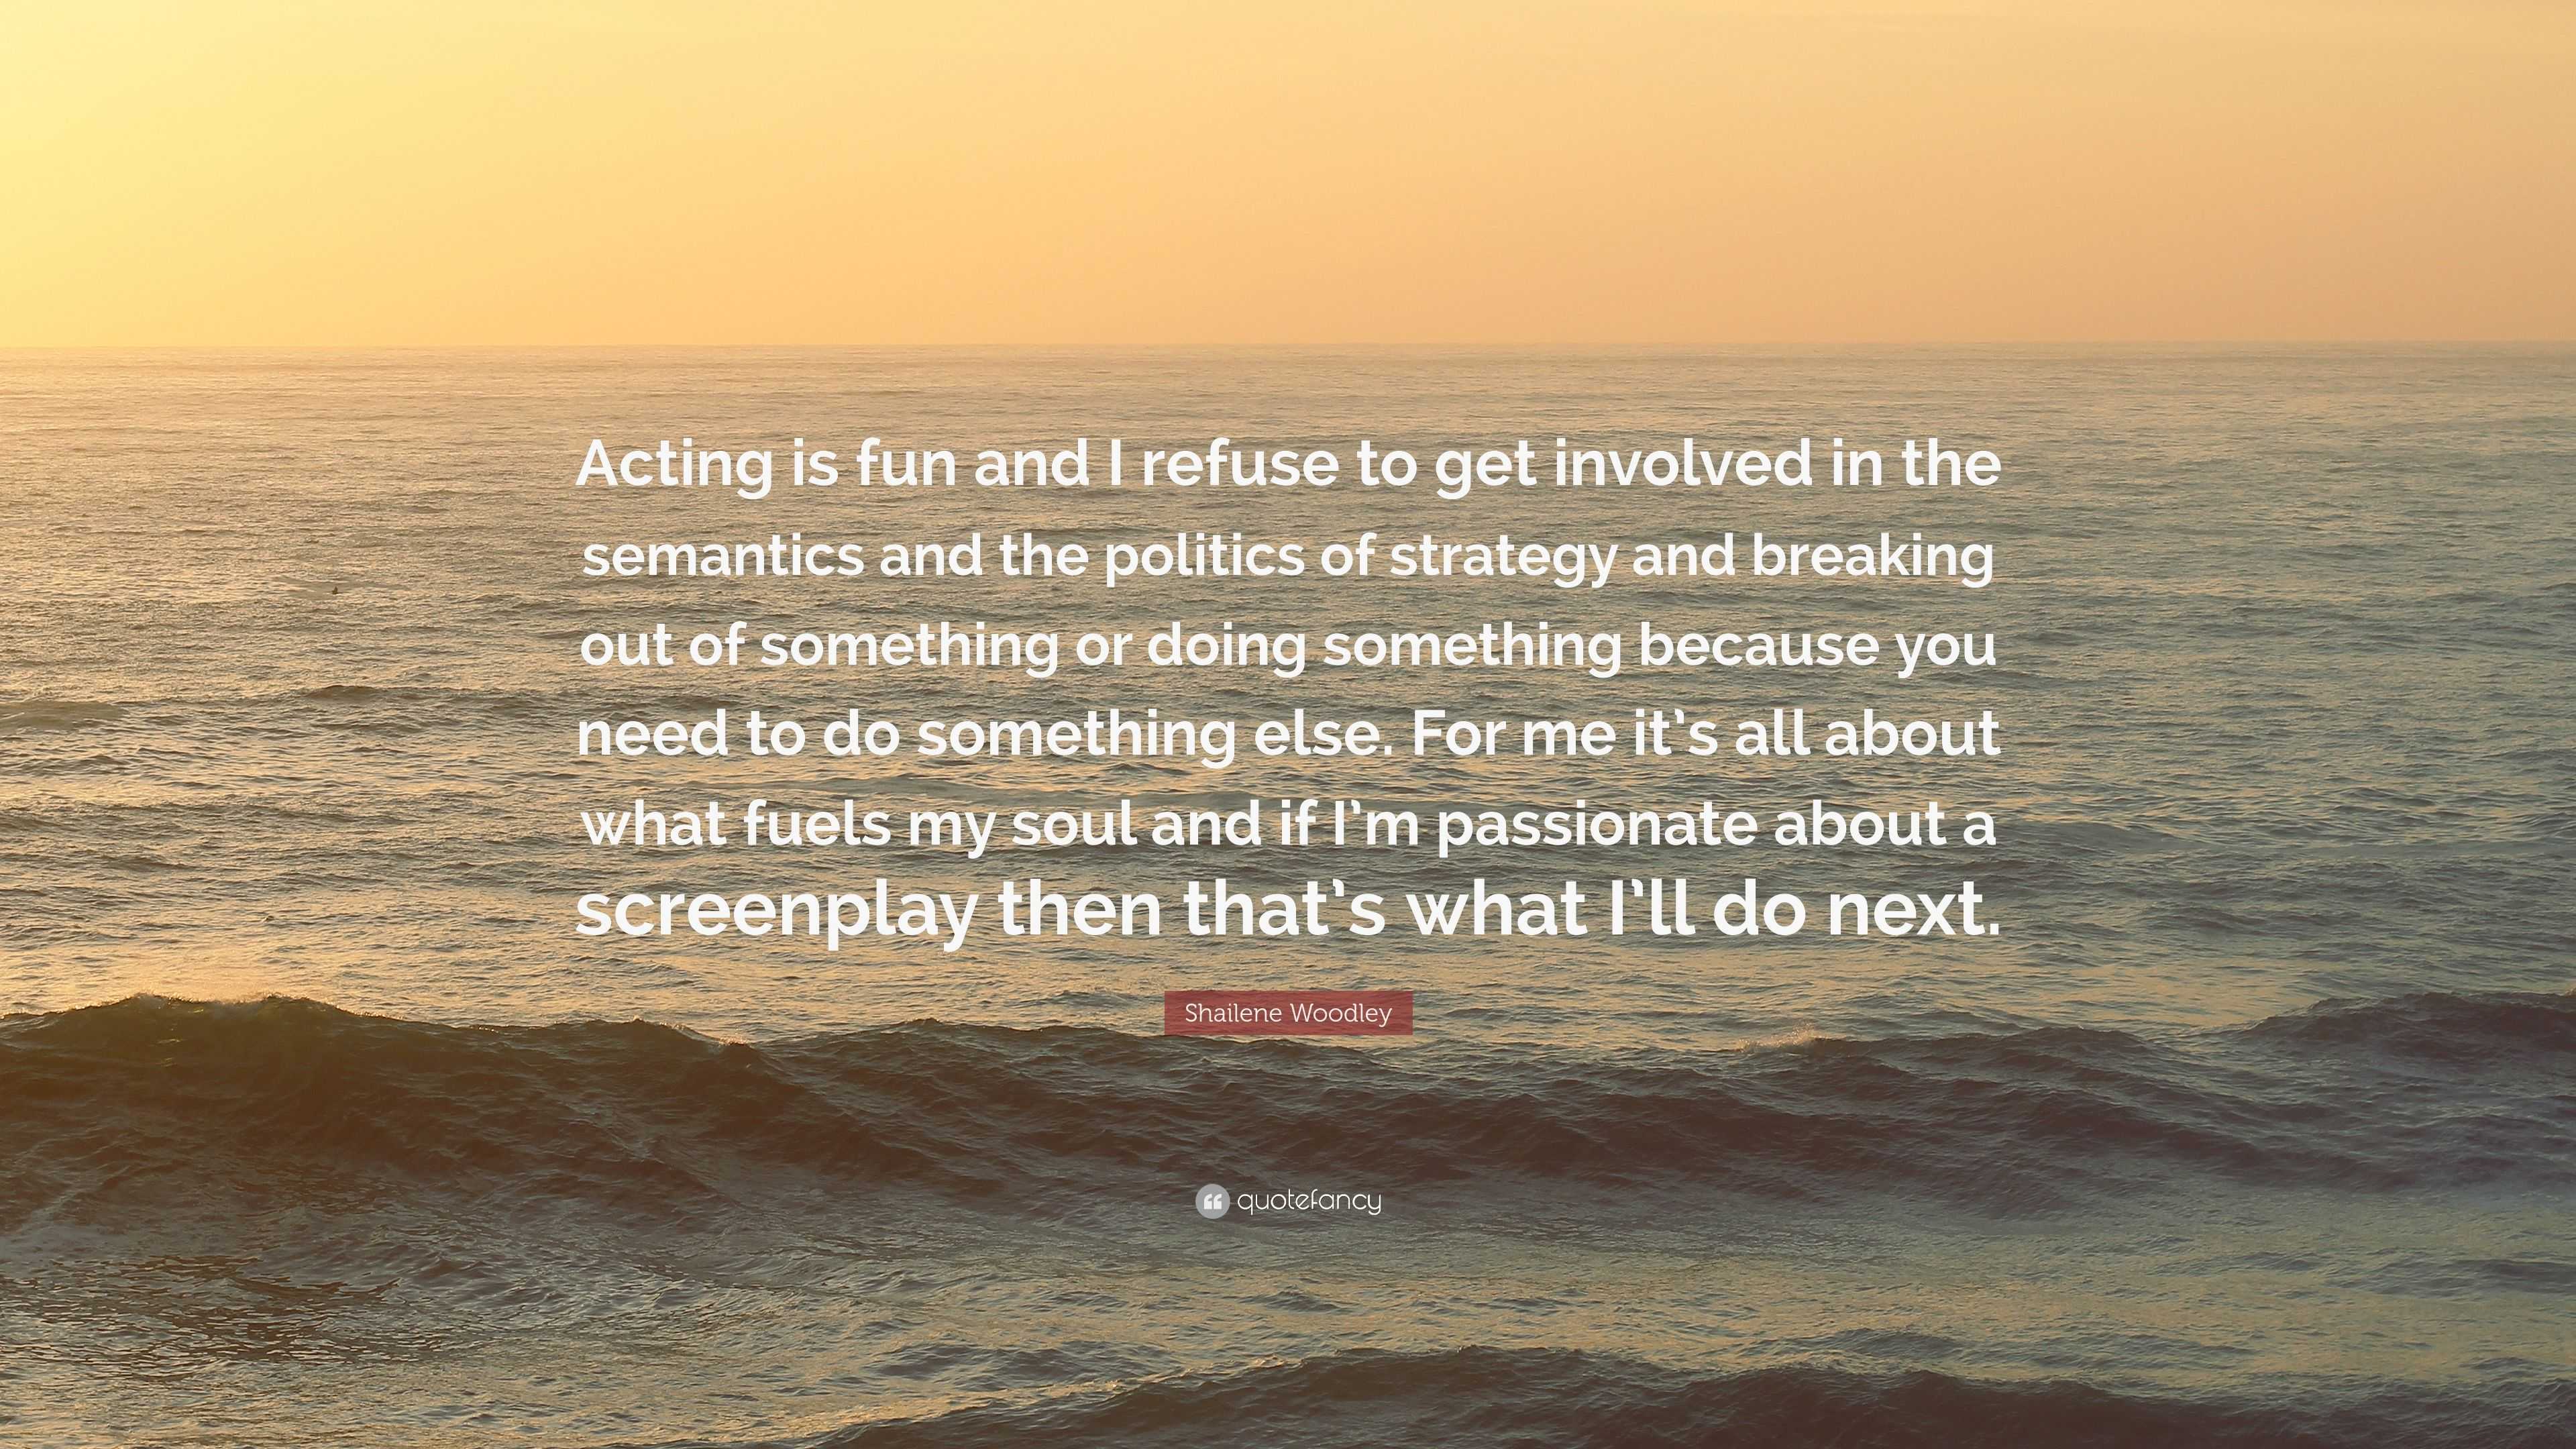 Shailene Woodley Quote: “Acting is fun and I refuse to get involved in the  semantics and the politics of strategy and breaking out of something o...”